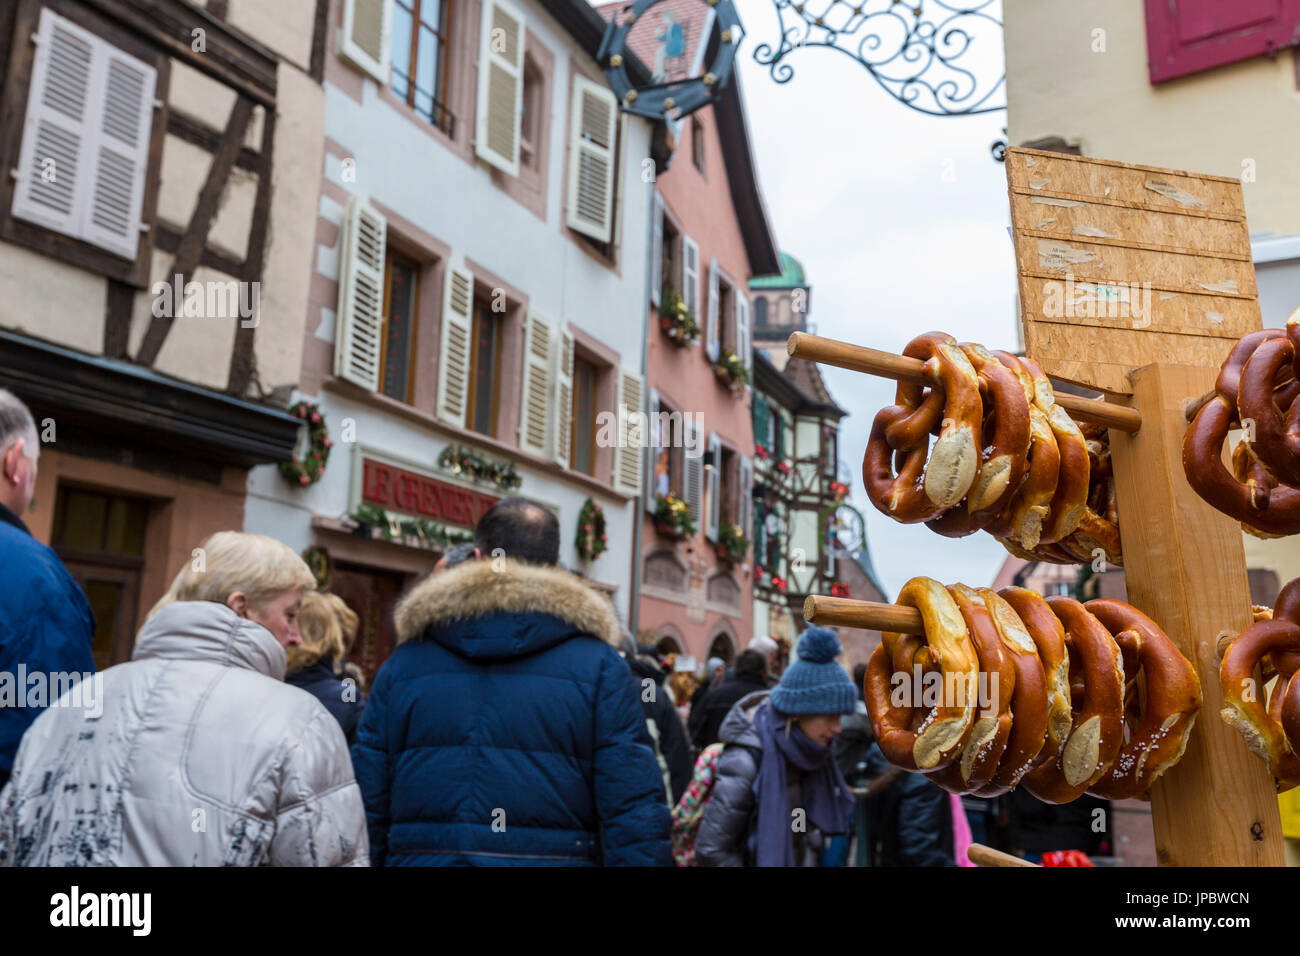 The typical bakery product called Bretzel in the old town of Kaysersberg Haut-Rhin department Alsace France Europe Stock Photo